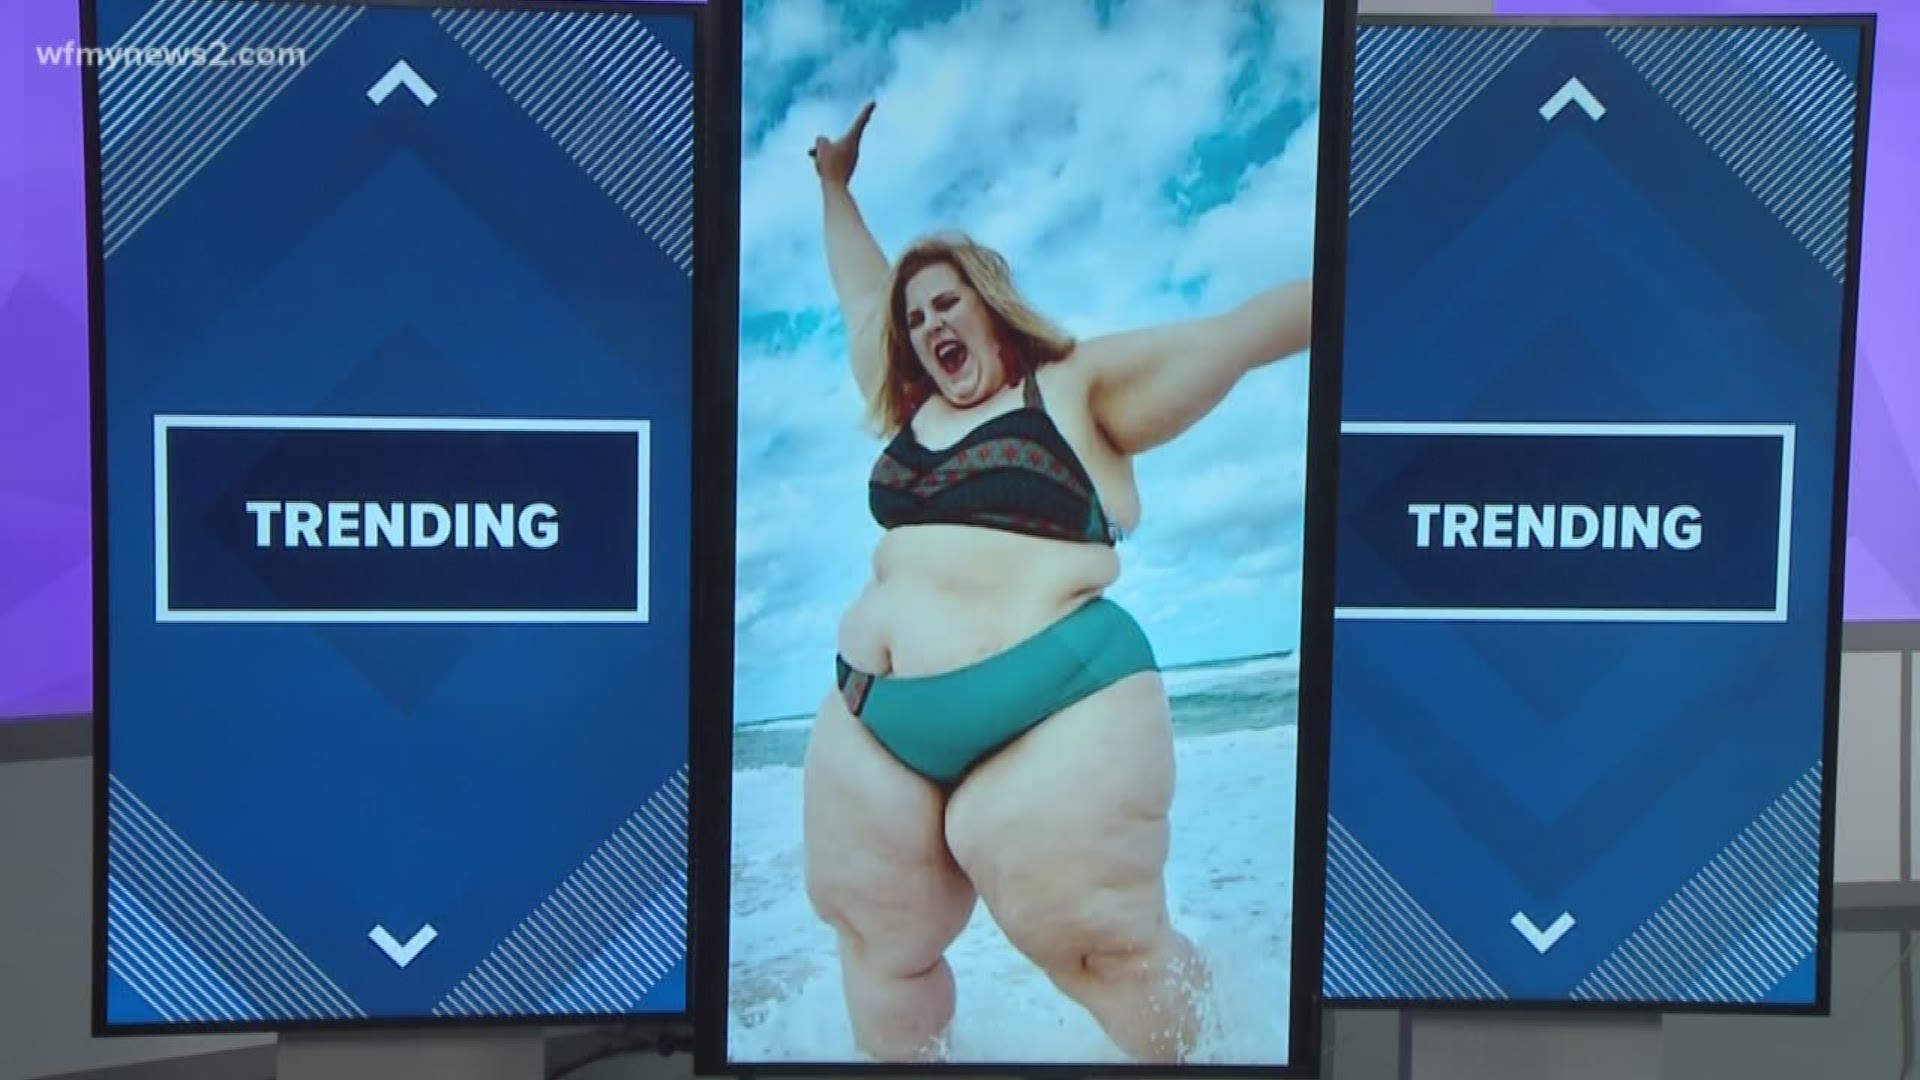 The company posted a picture of a plus size model wearing  a bikini with the slogan "Go out there and slay the day".  
Some people support it. Some don't. Blanca Cobb weighs in on why.